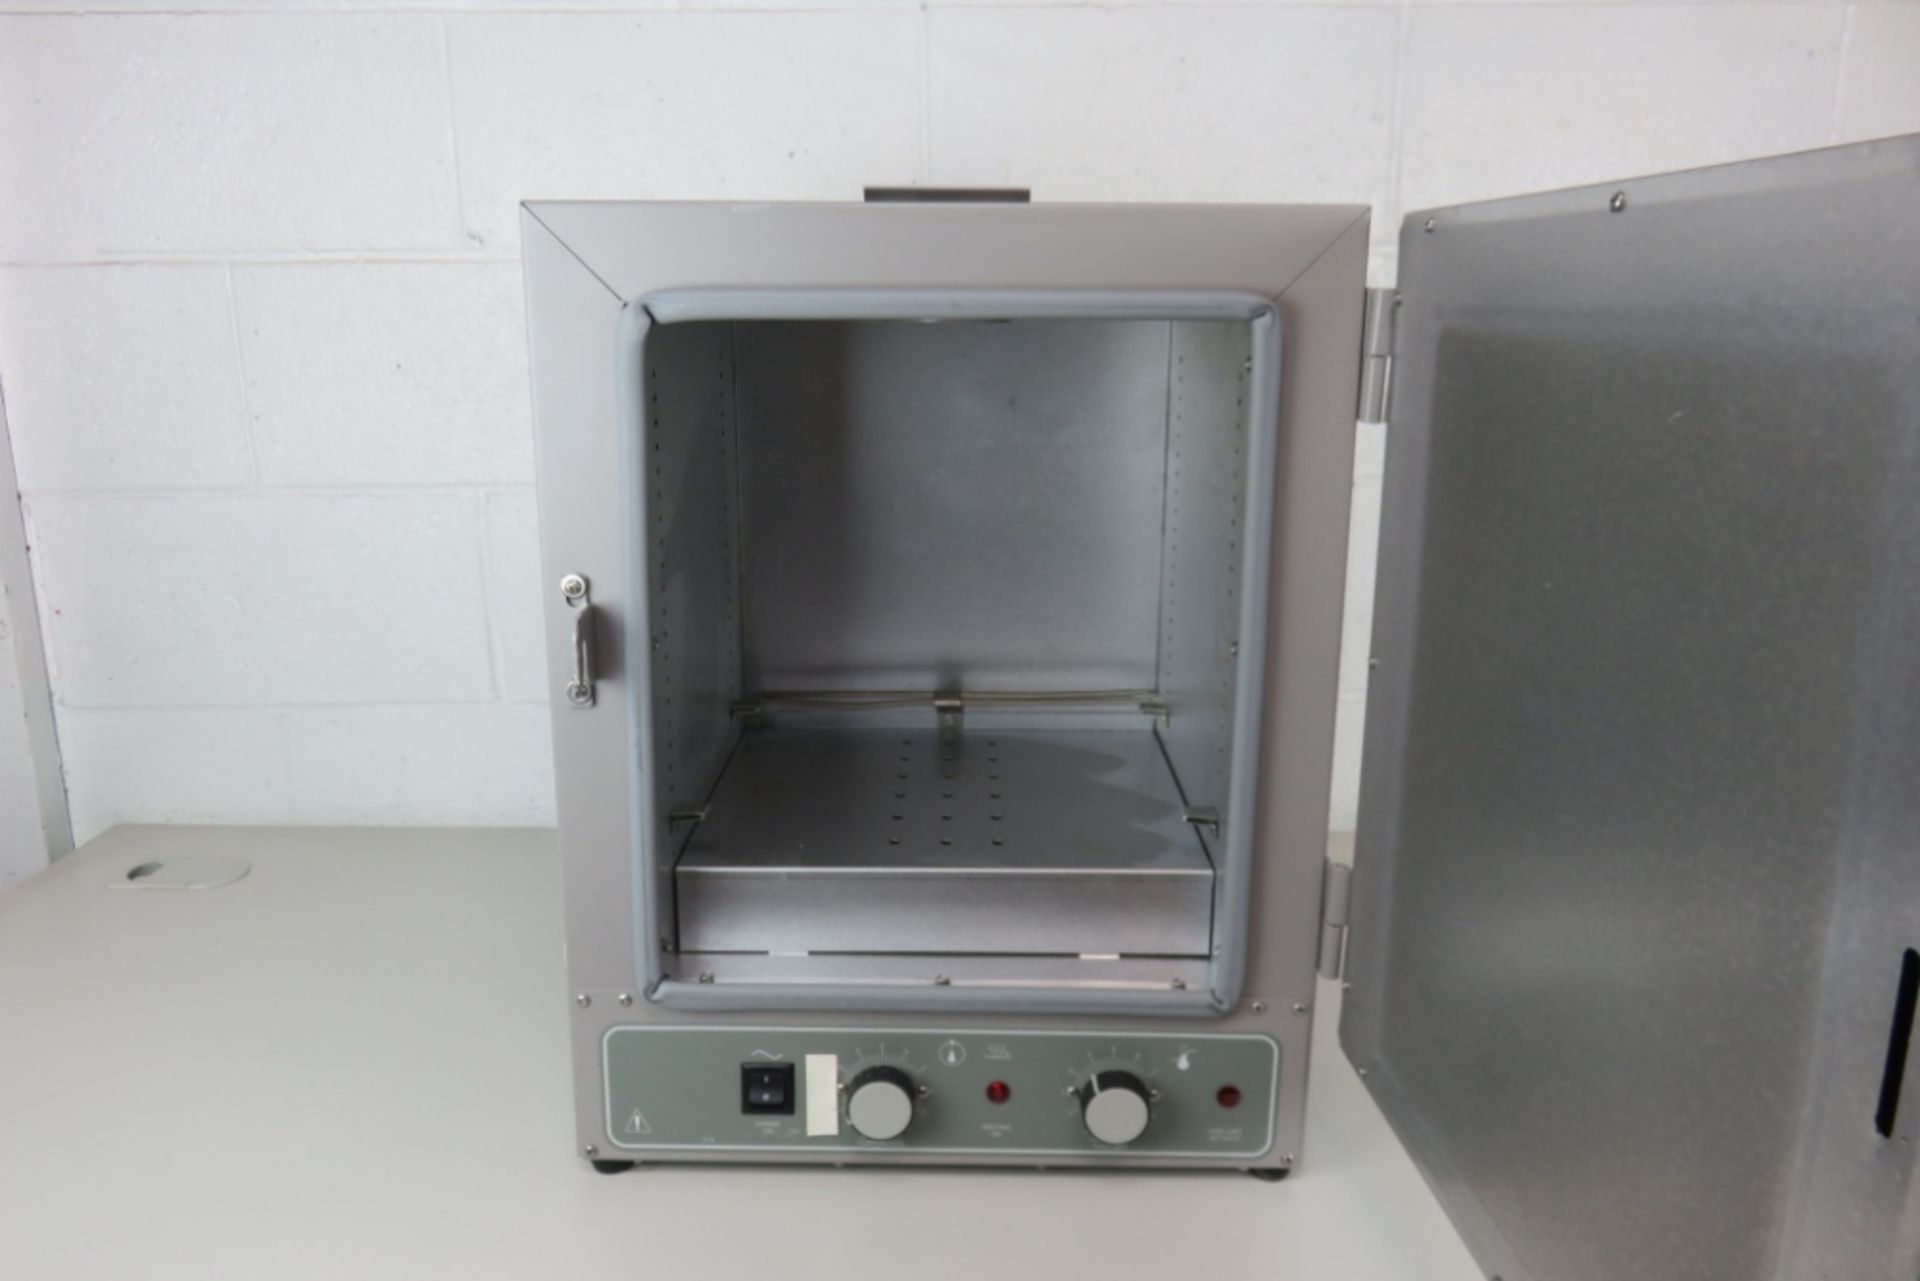 VWR 1310 Oven - Image 2 of 4